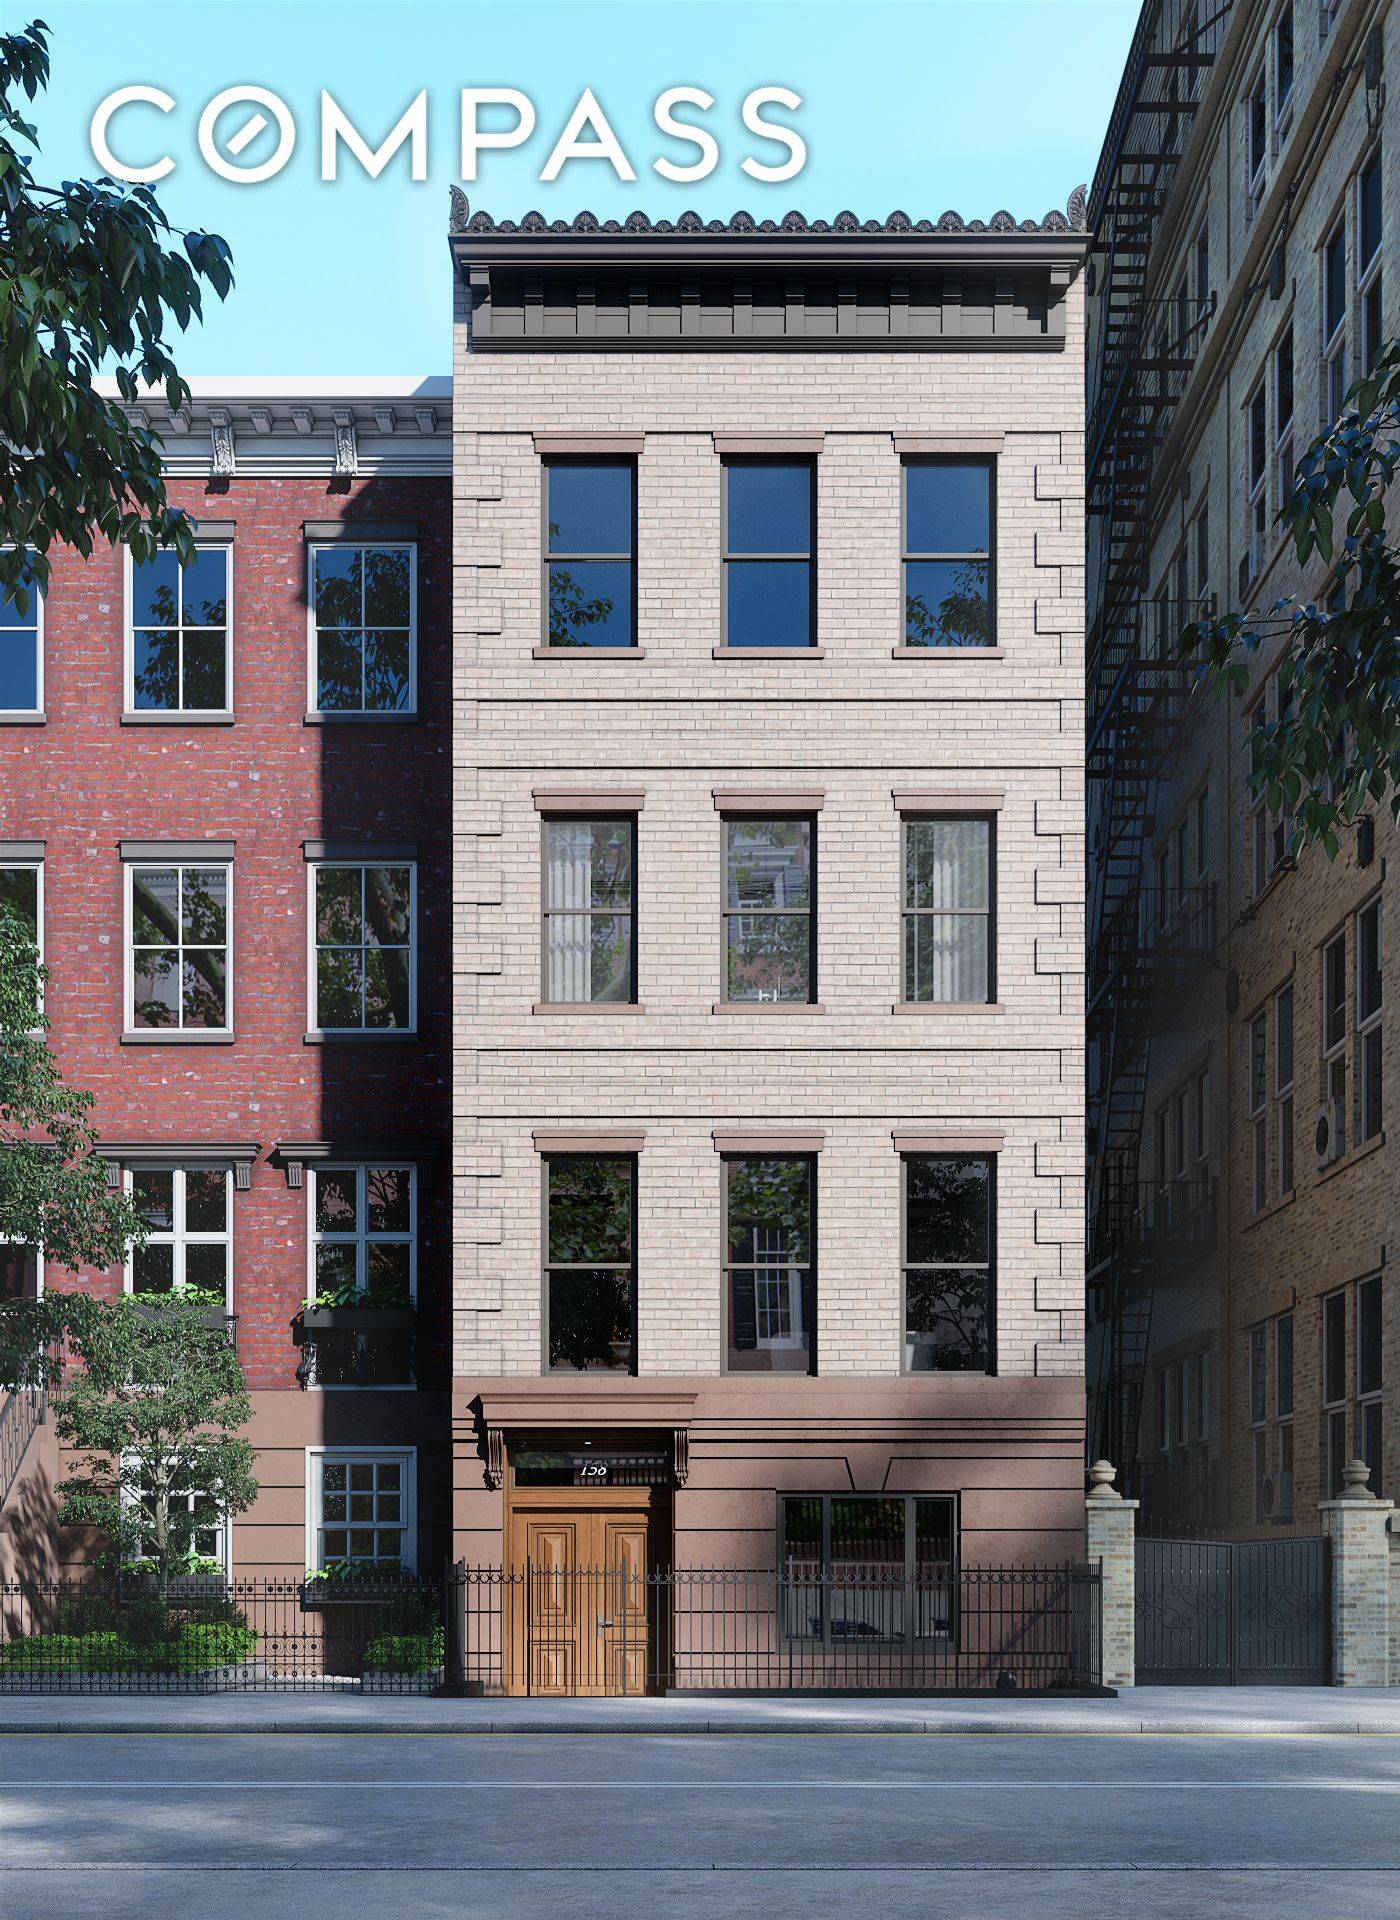 Nestled at the meeting point of Greenwich Village and the West Village, 158 West 13th Street presents an exceptional opportunity to create a highly desirable single family townhouse.